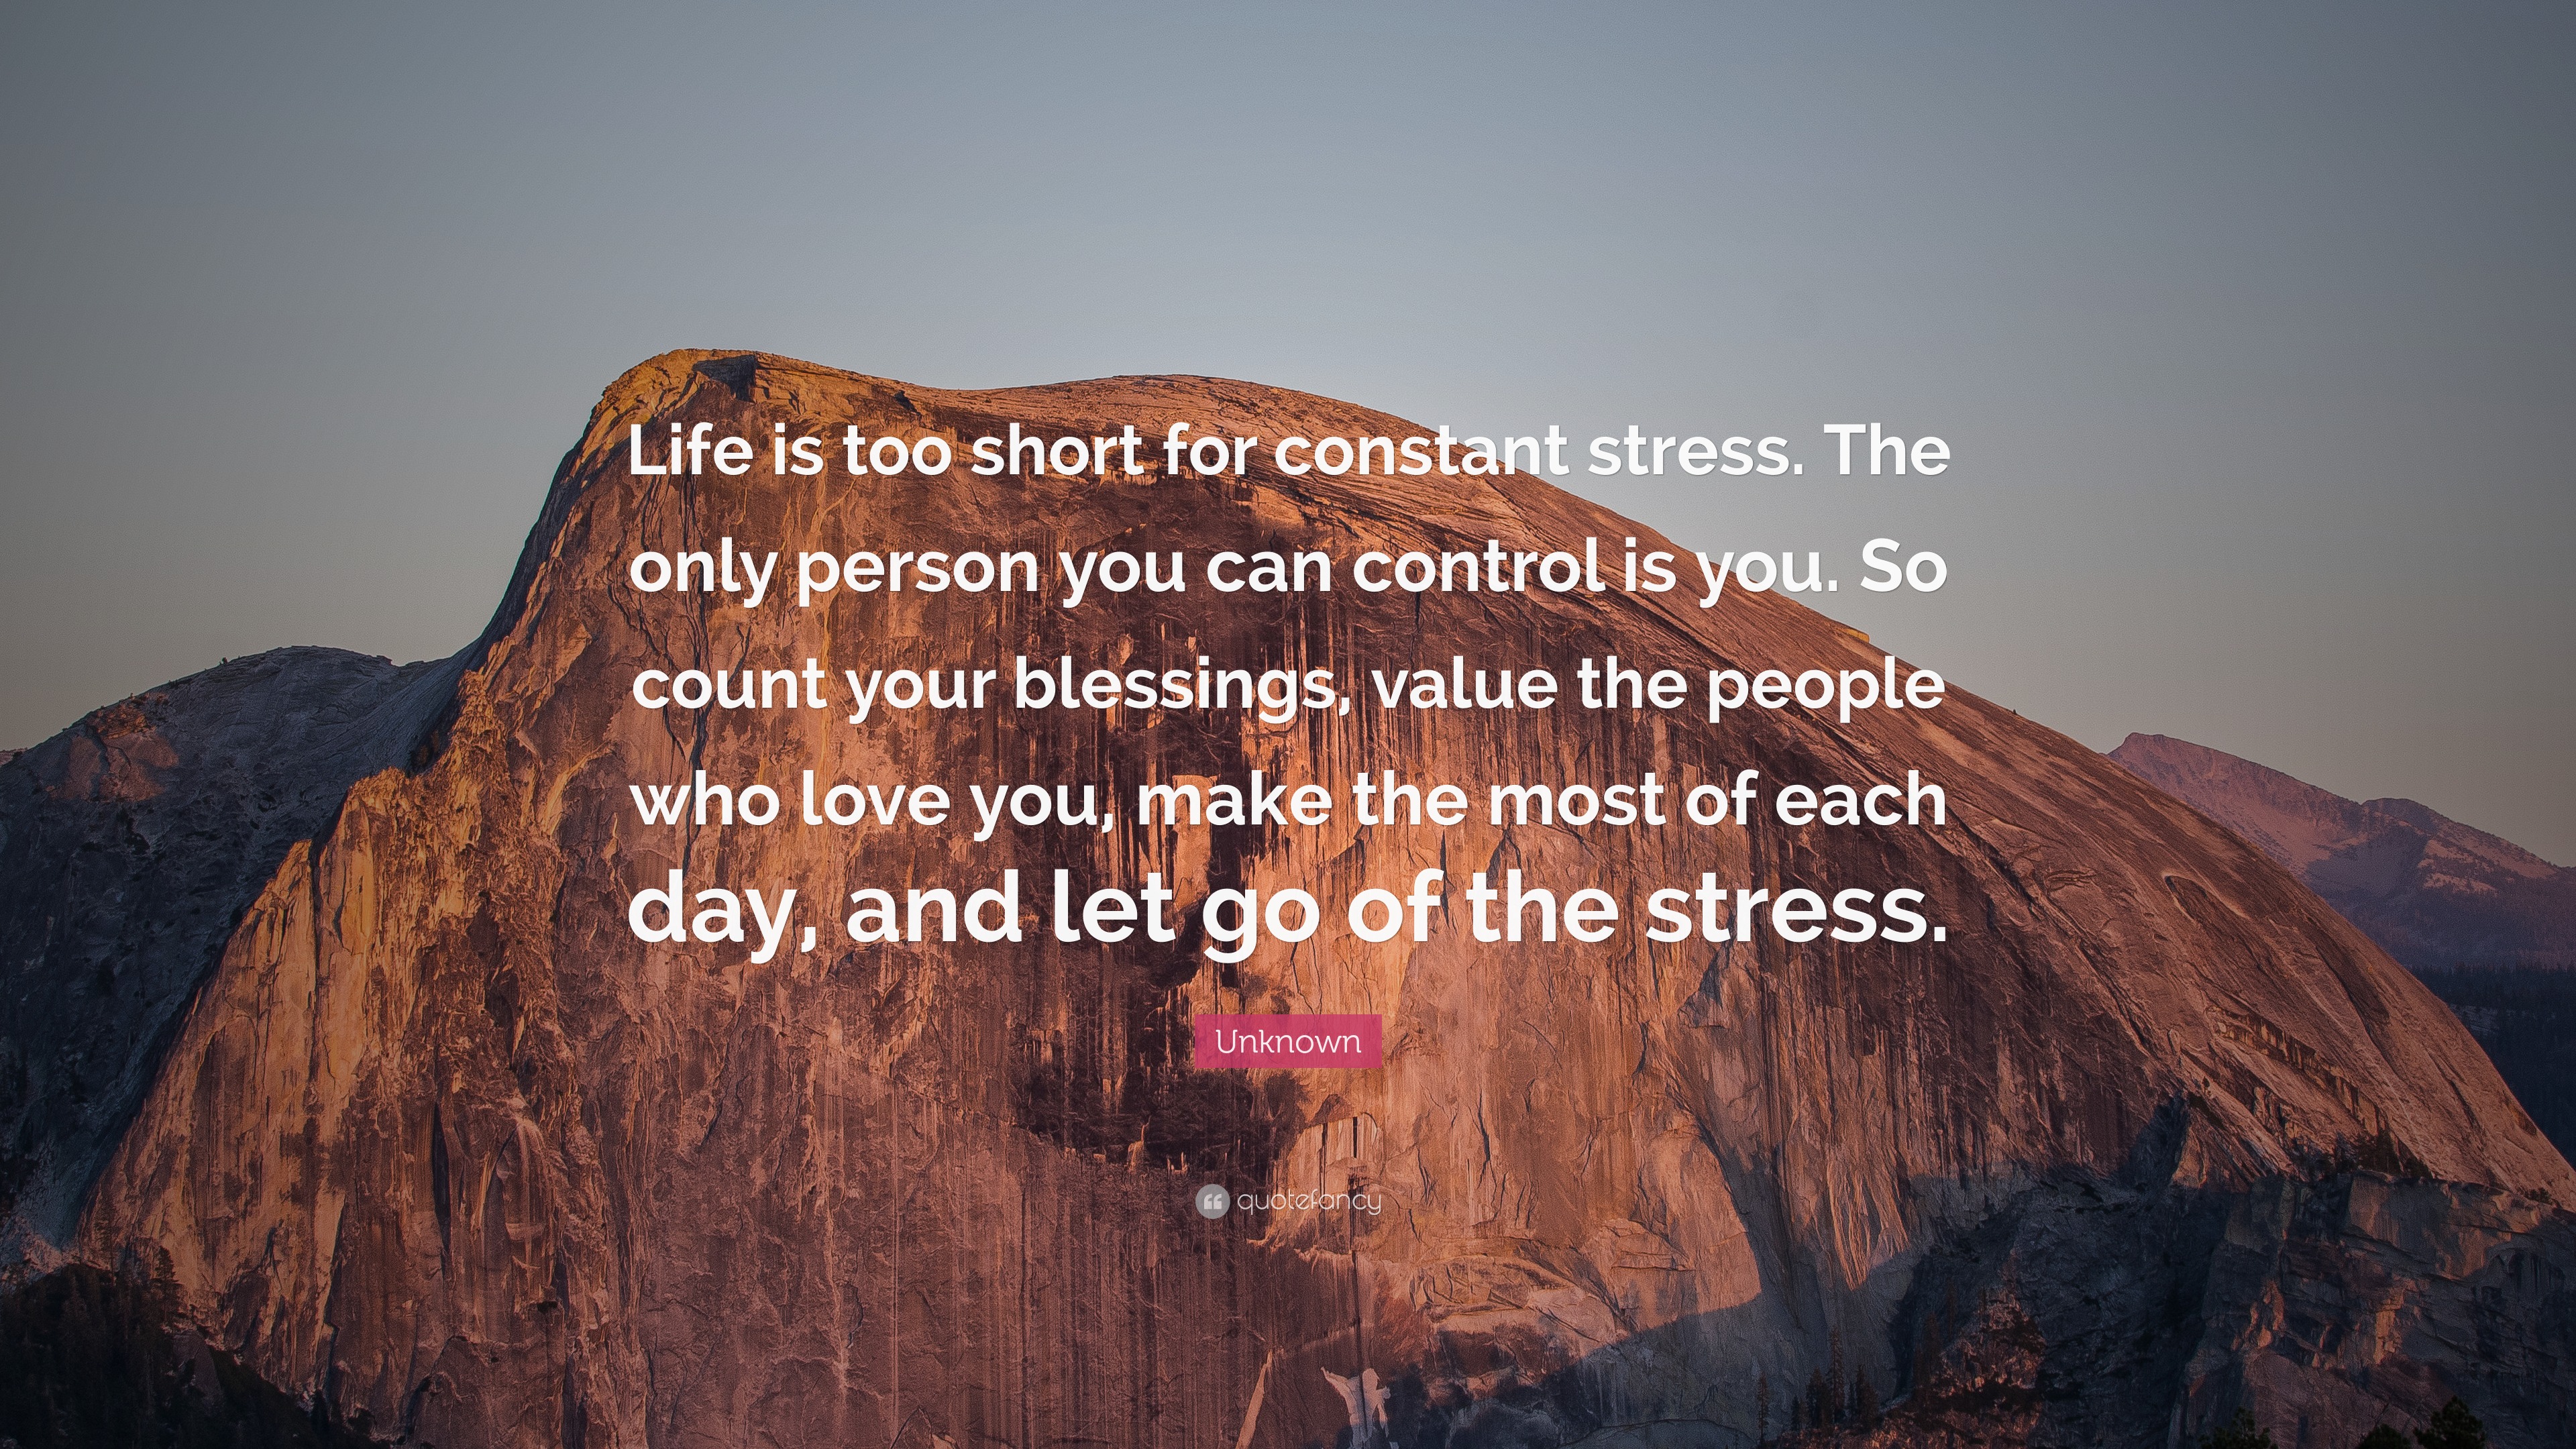 Unknown Quote: “Life is too short for constant stress. The only person you  can control is you. So count your blessings, value the people”